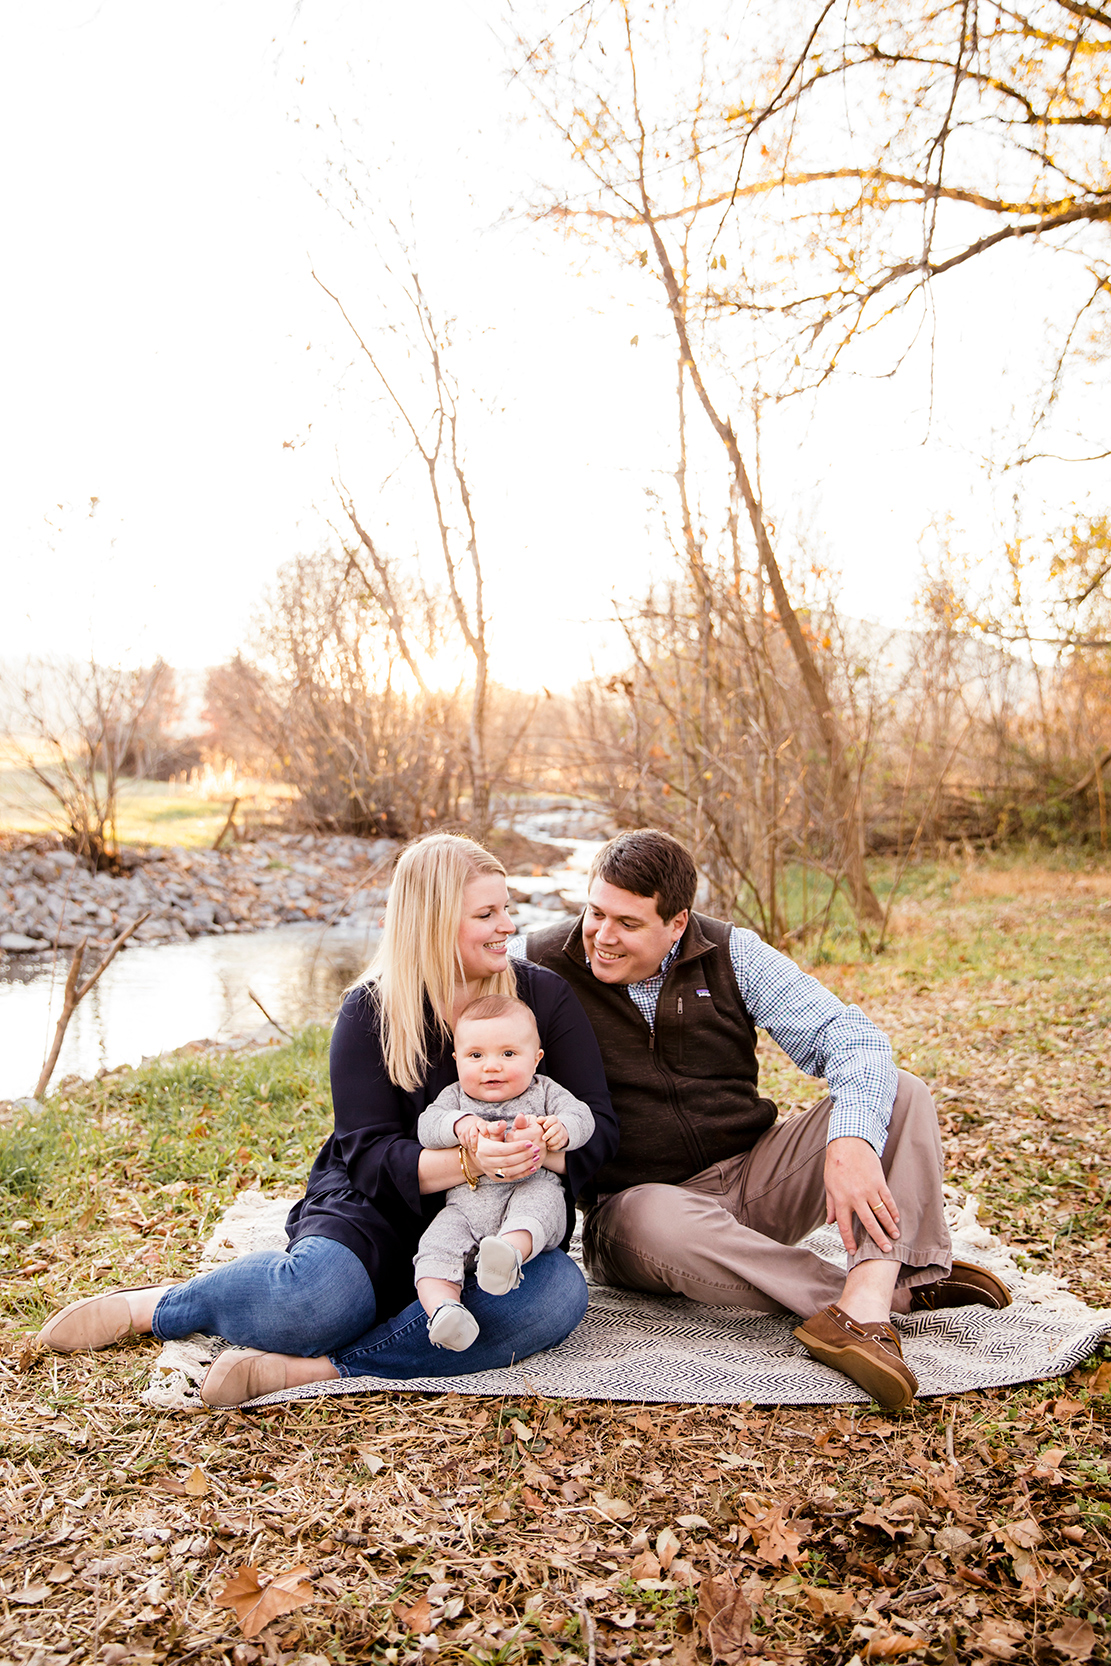 Cary Family Photos at Bold Rock Cider - Image Property of www.j-dphoto.com